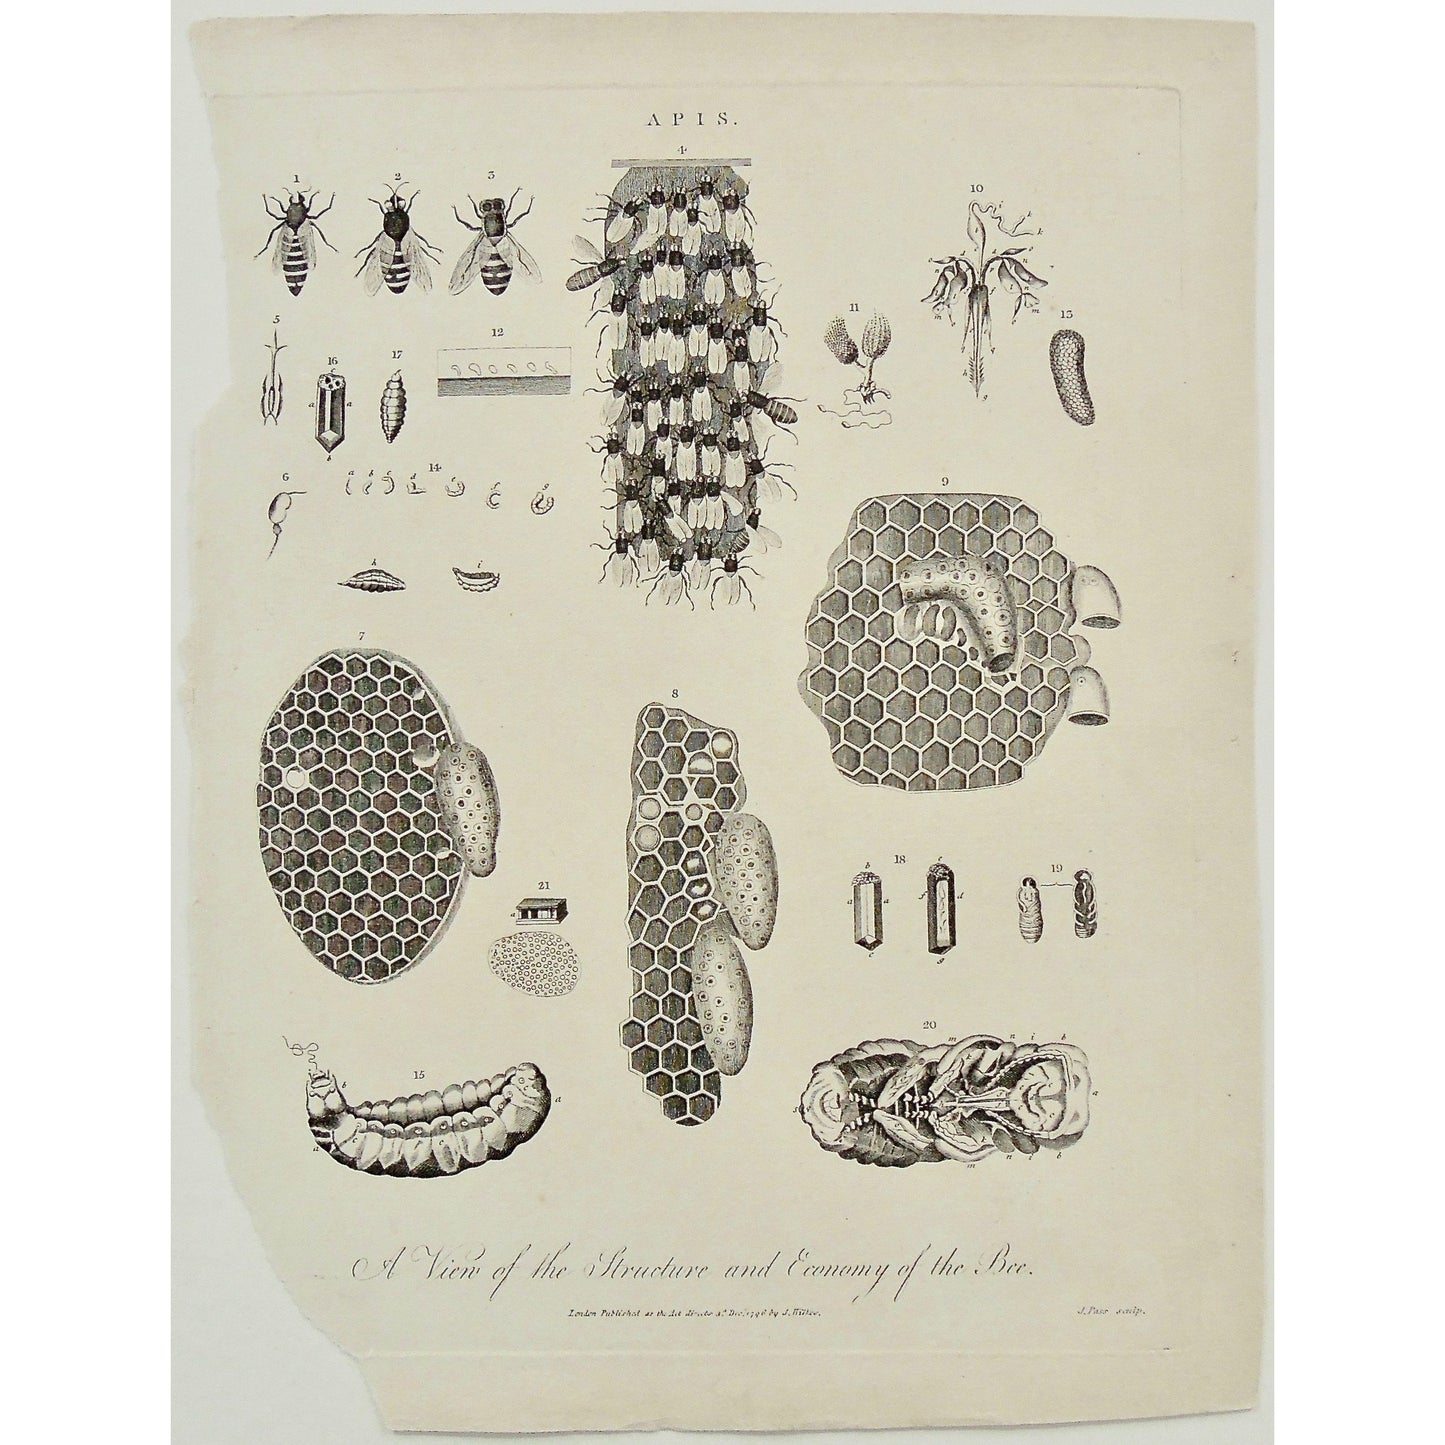 Apis, Bees, bee, Wasp, honeycomb, honey, stages, lifecycle, insect, insects, bugs, bug, Structure of the bee, economy of the bee, Wilkes, Adlard, Pass, Antique Print, Antique, Prints, Art, Vintage, Wall art, Wall decor, engraving, encyclopedia, Encyclopaedia Londinensis, London, 1796,